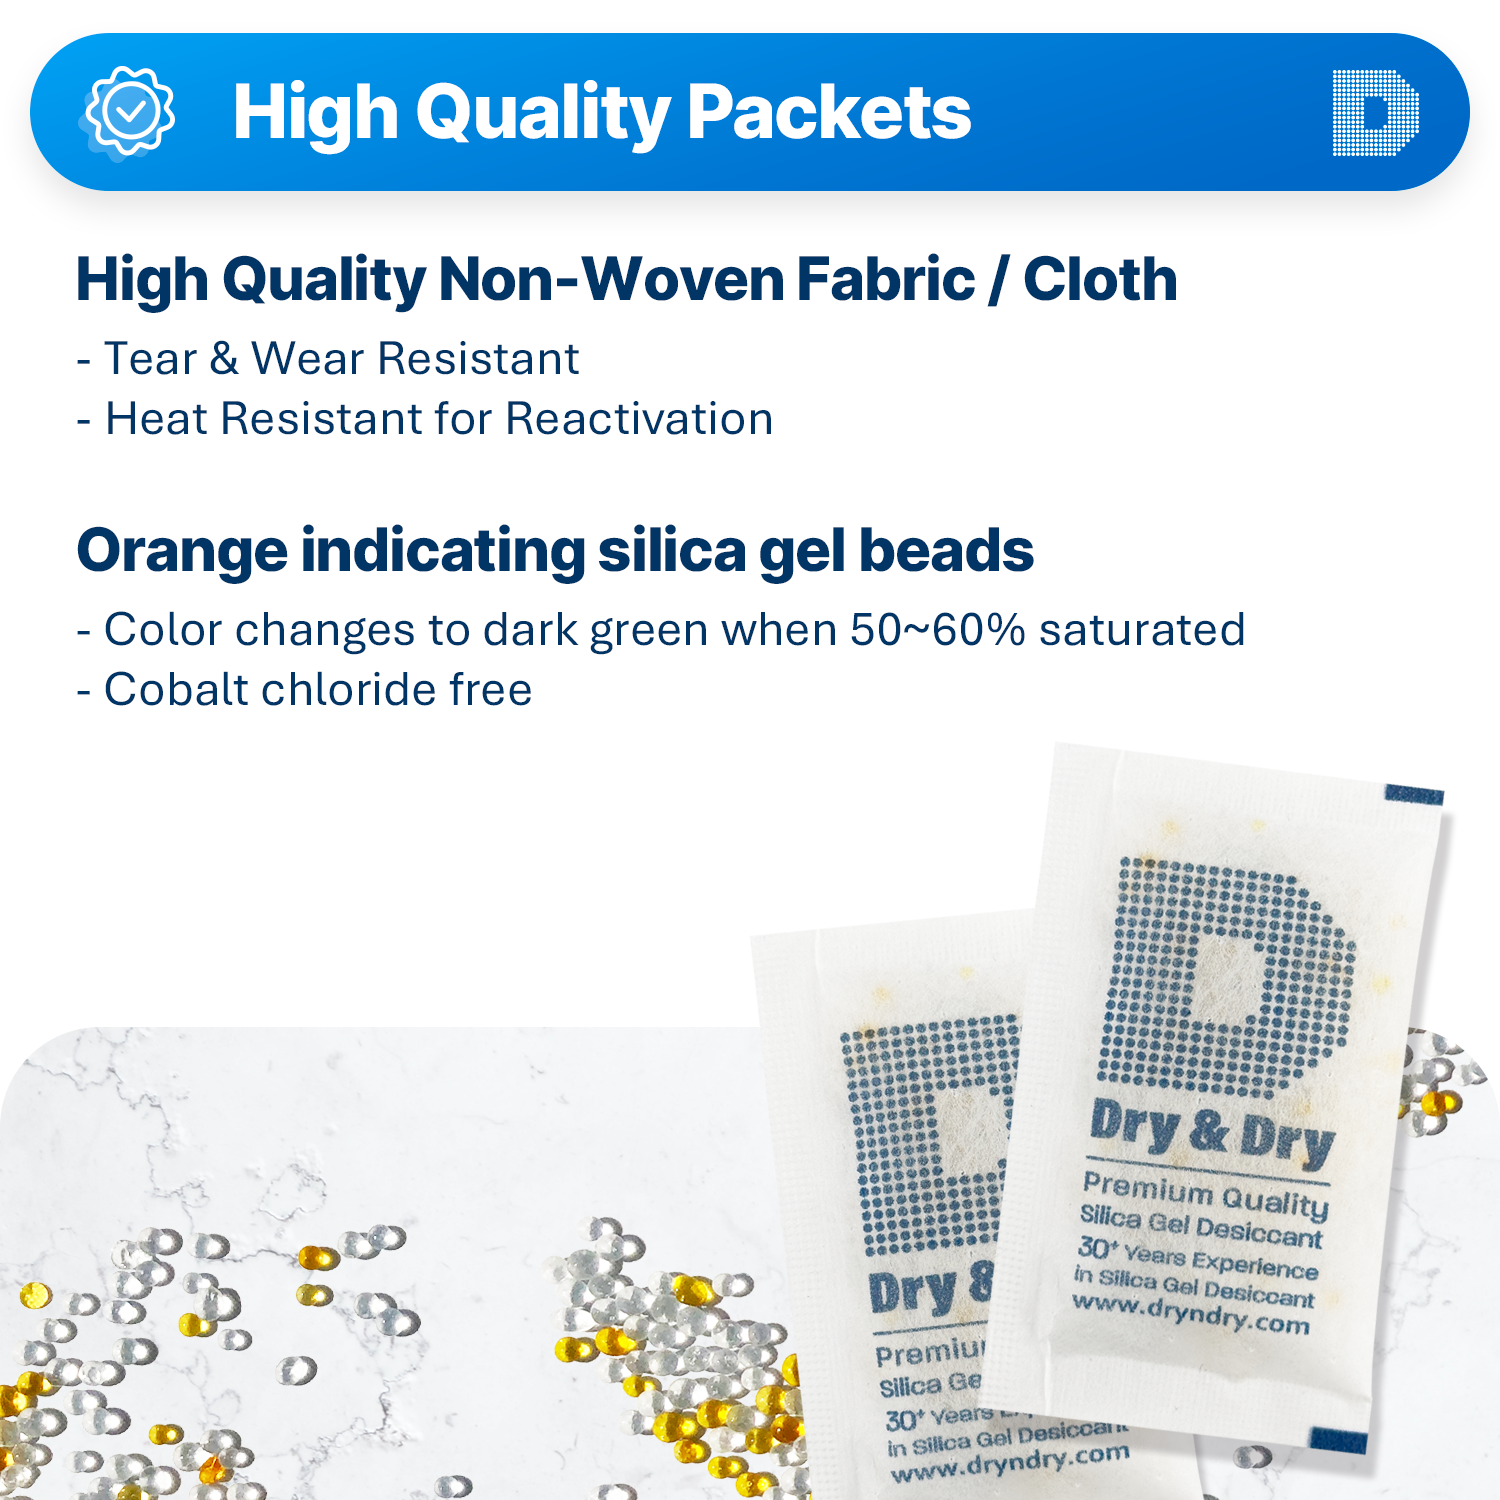 10 Gram Non-Woven Fabric (Cloth) Orange Indicating Packets